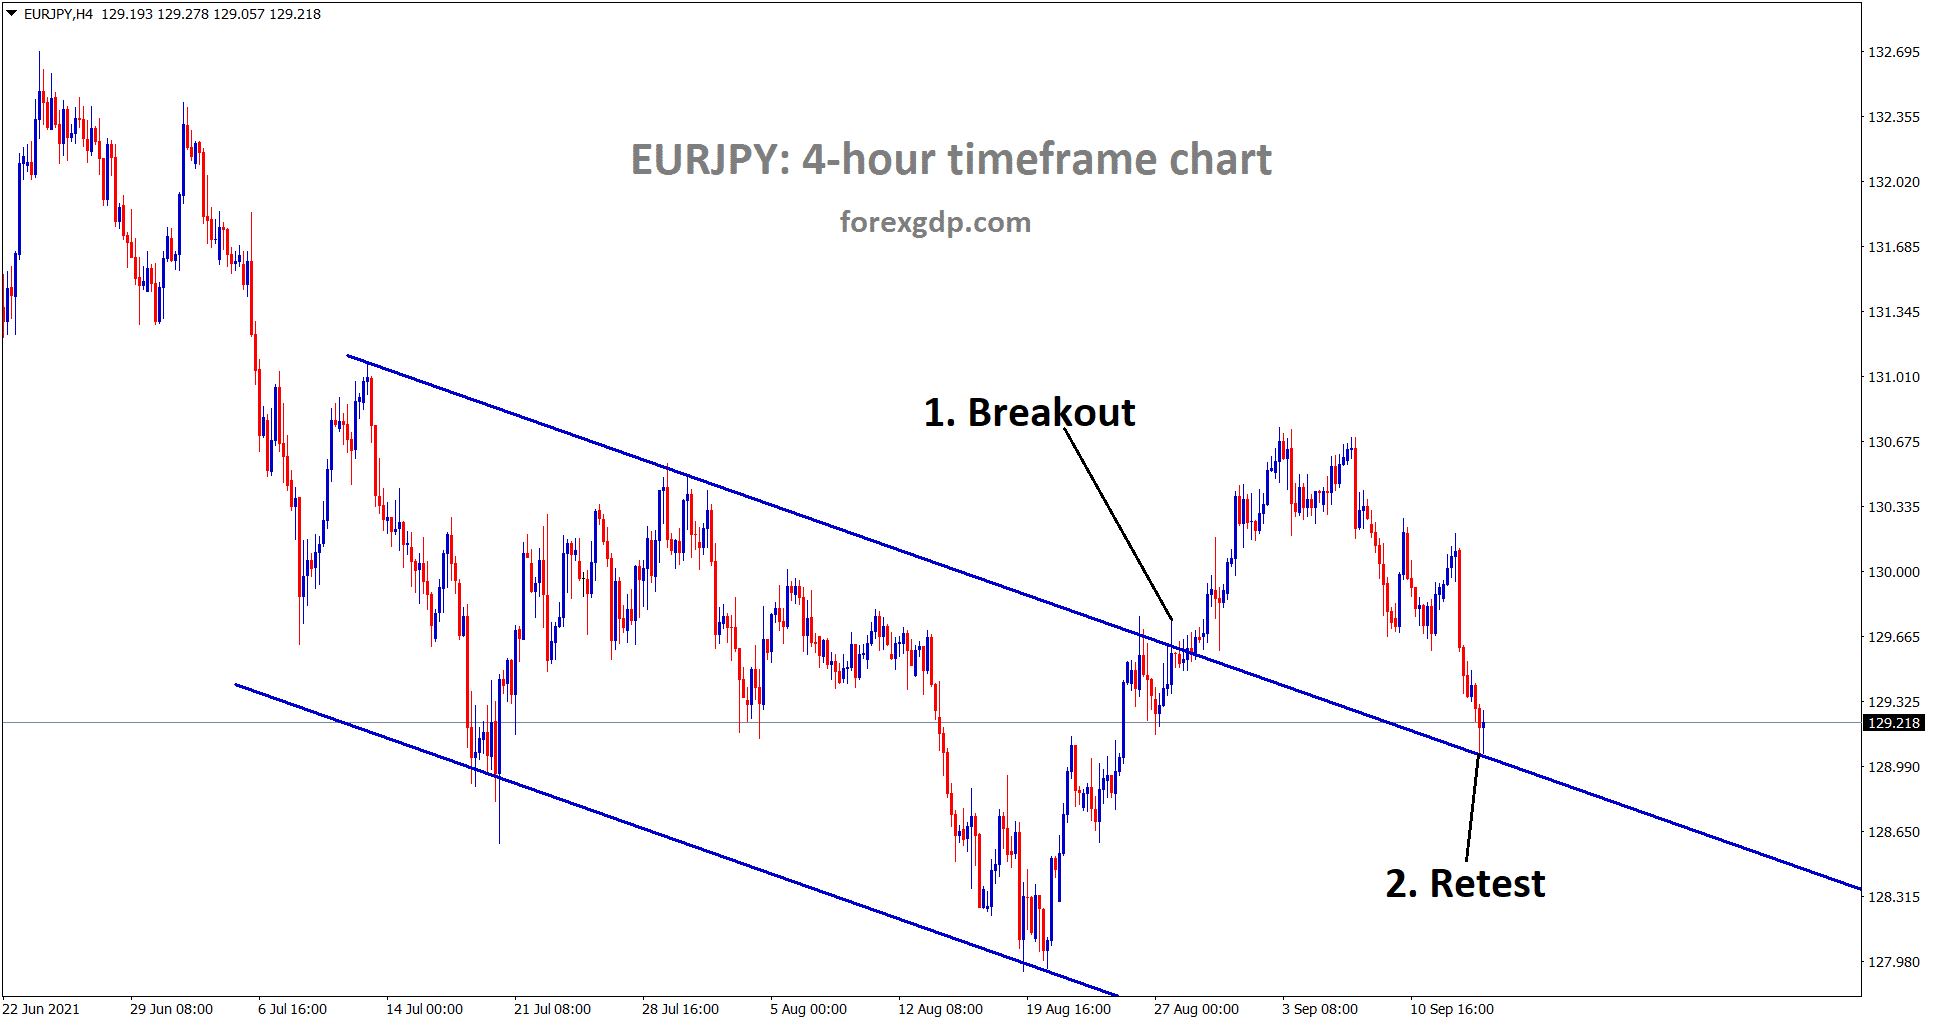 EURJPY is standing at the retest area of the broken descending channel